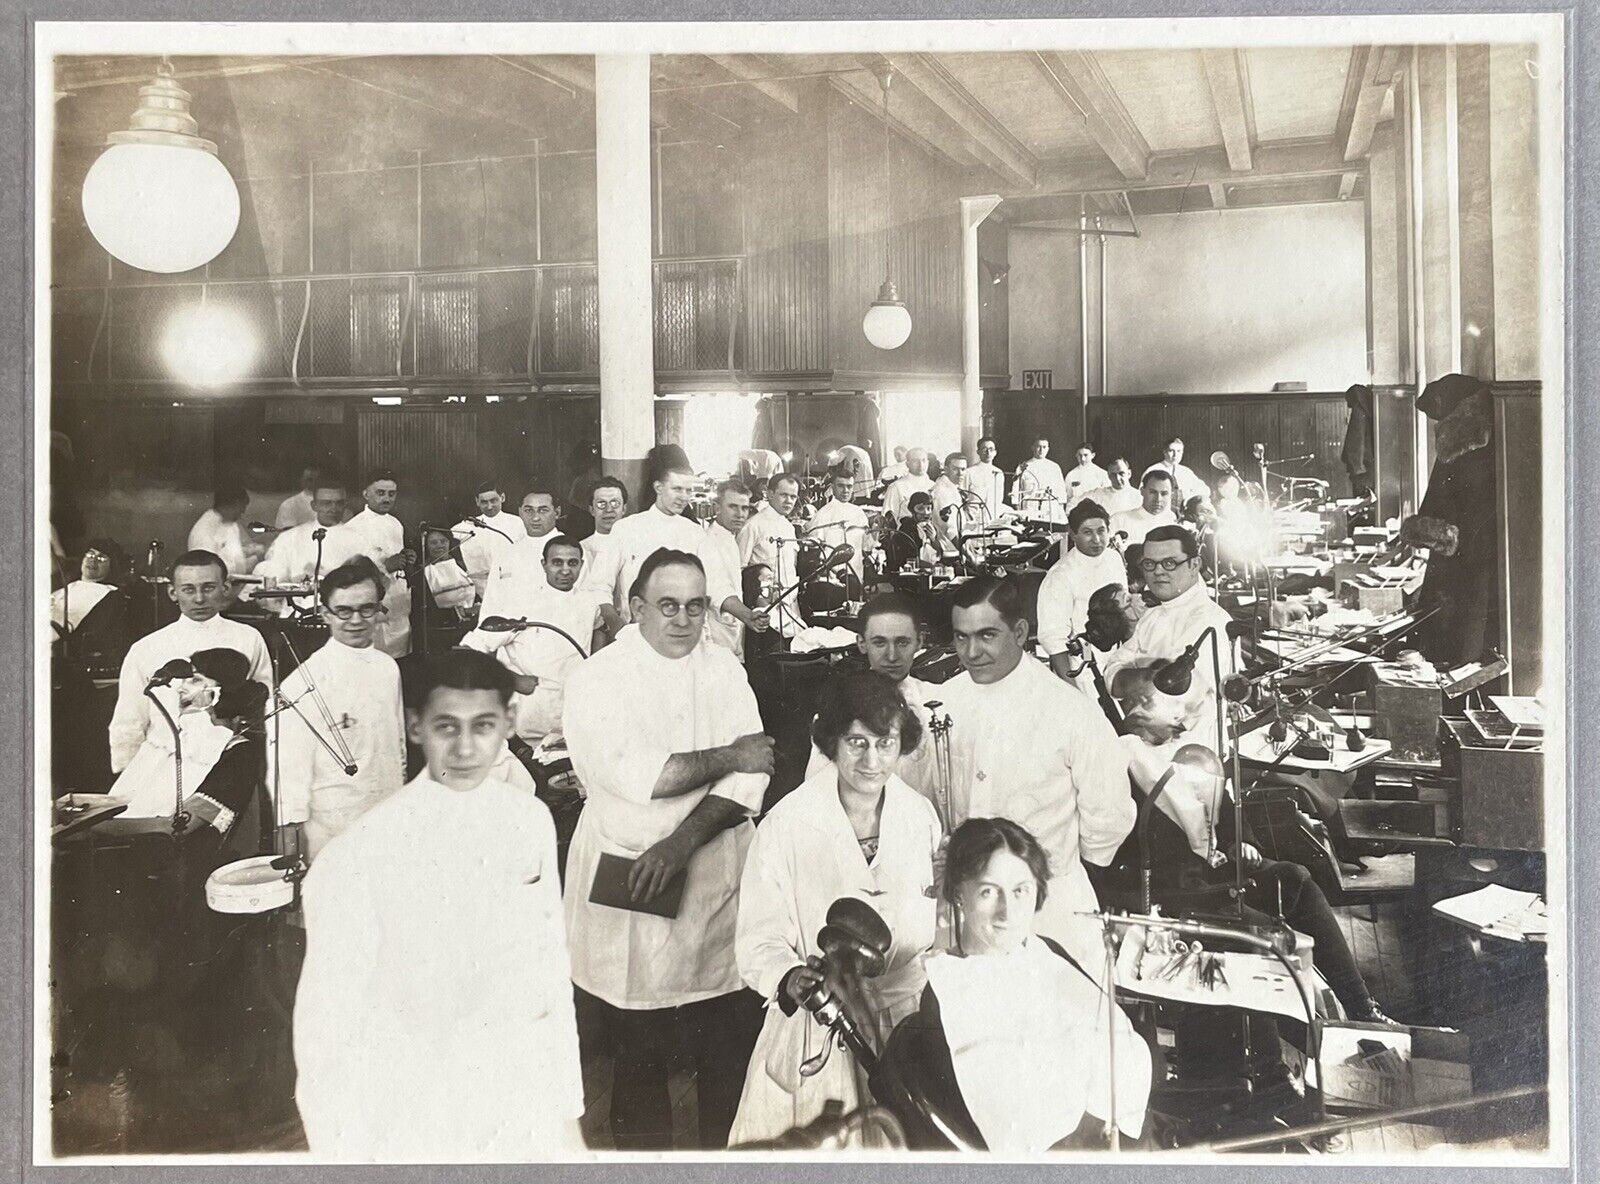 Large Antique Mounted Photo Of Dental School, Early 1900s Dentist